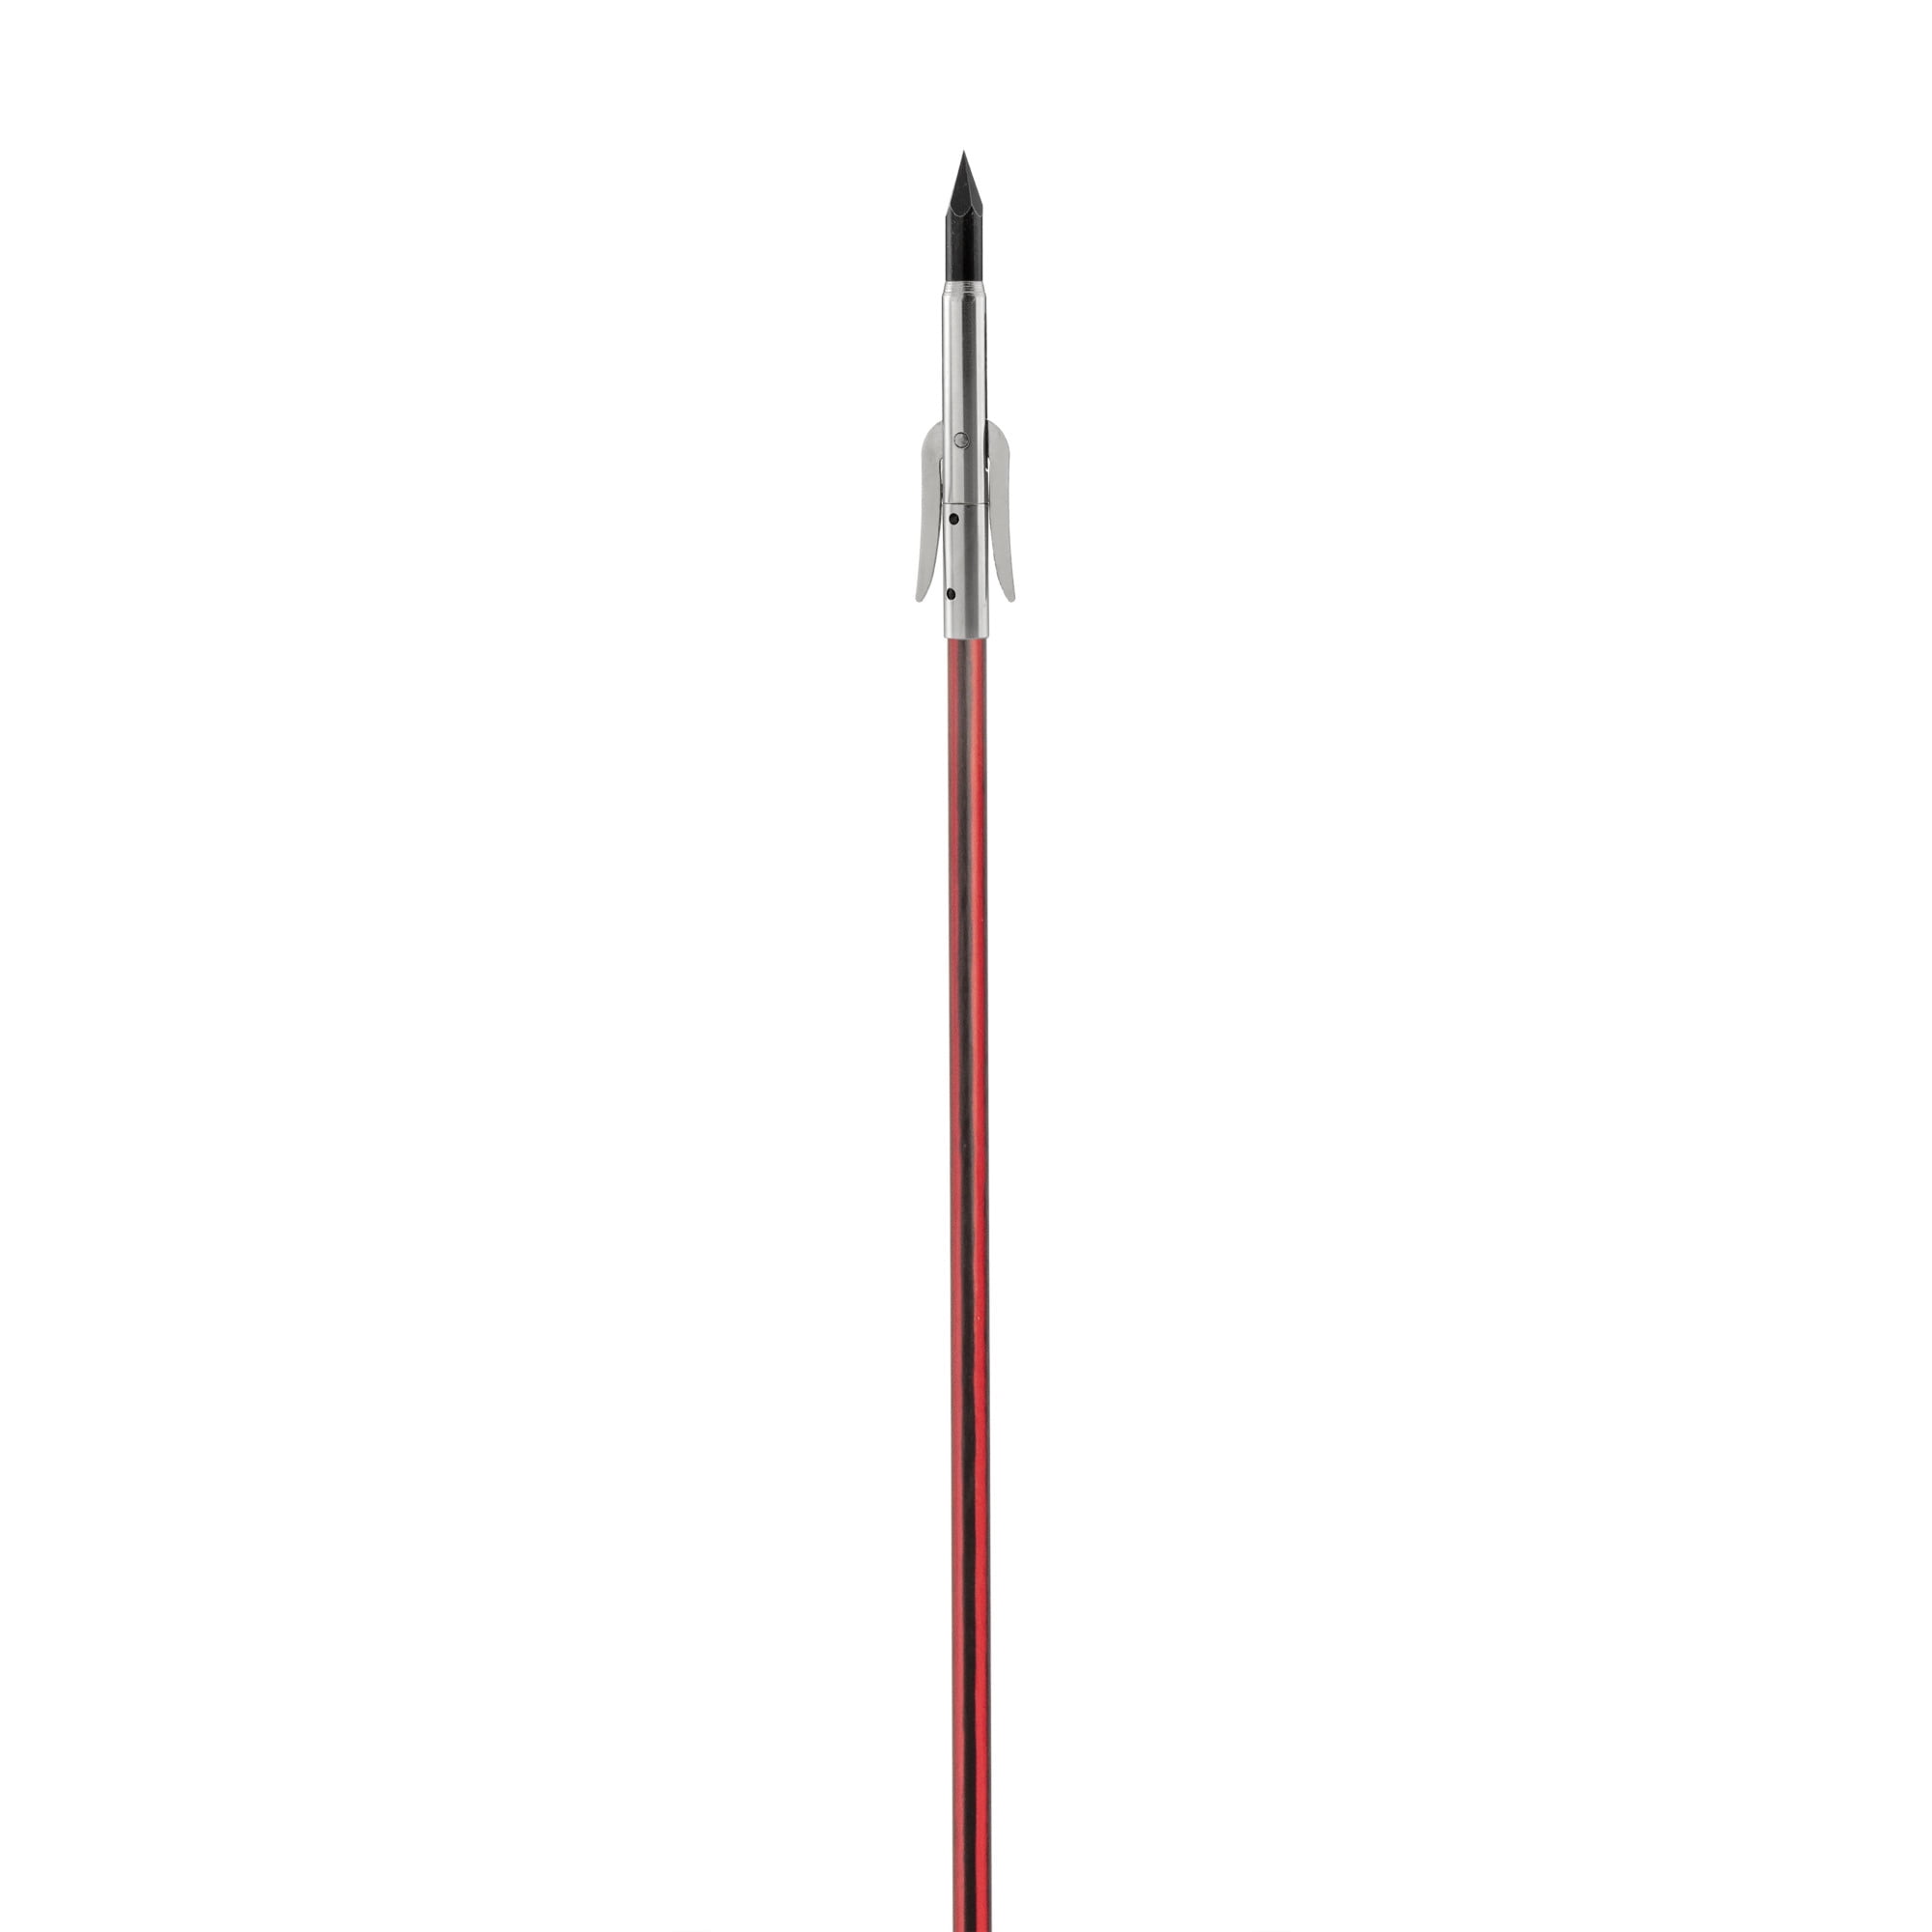 Cajun Bowfishing Fiberglass and Carbon Infused Arrow with Sting-A-Ree  Tournament Reversible Point 